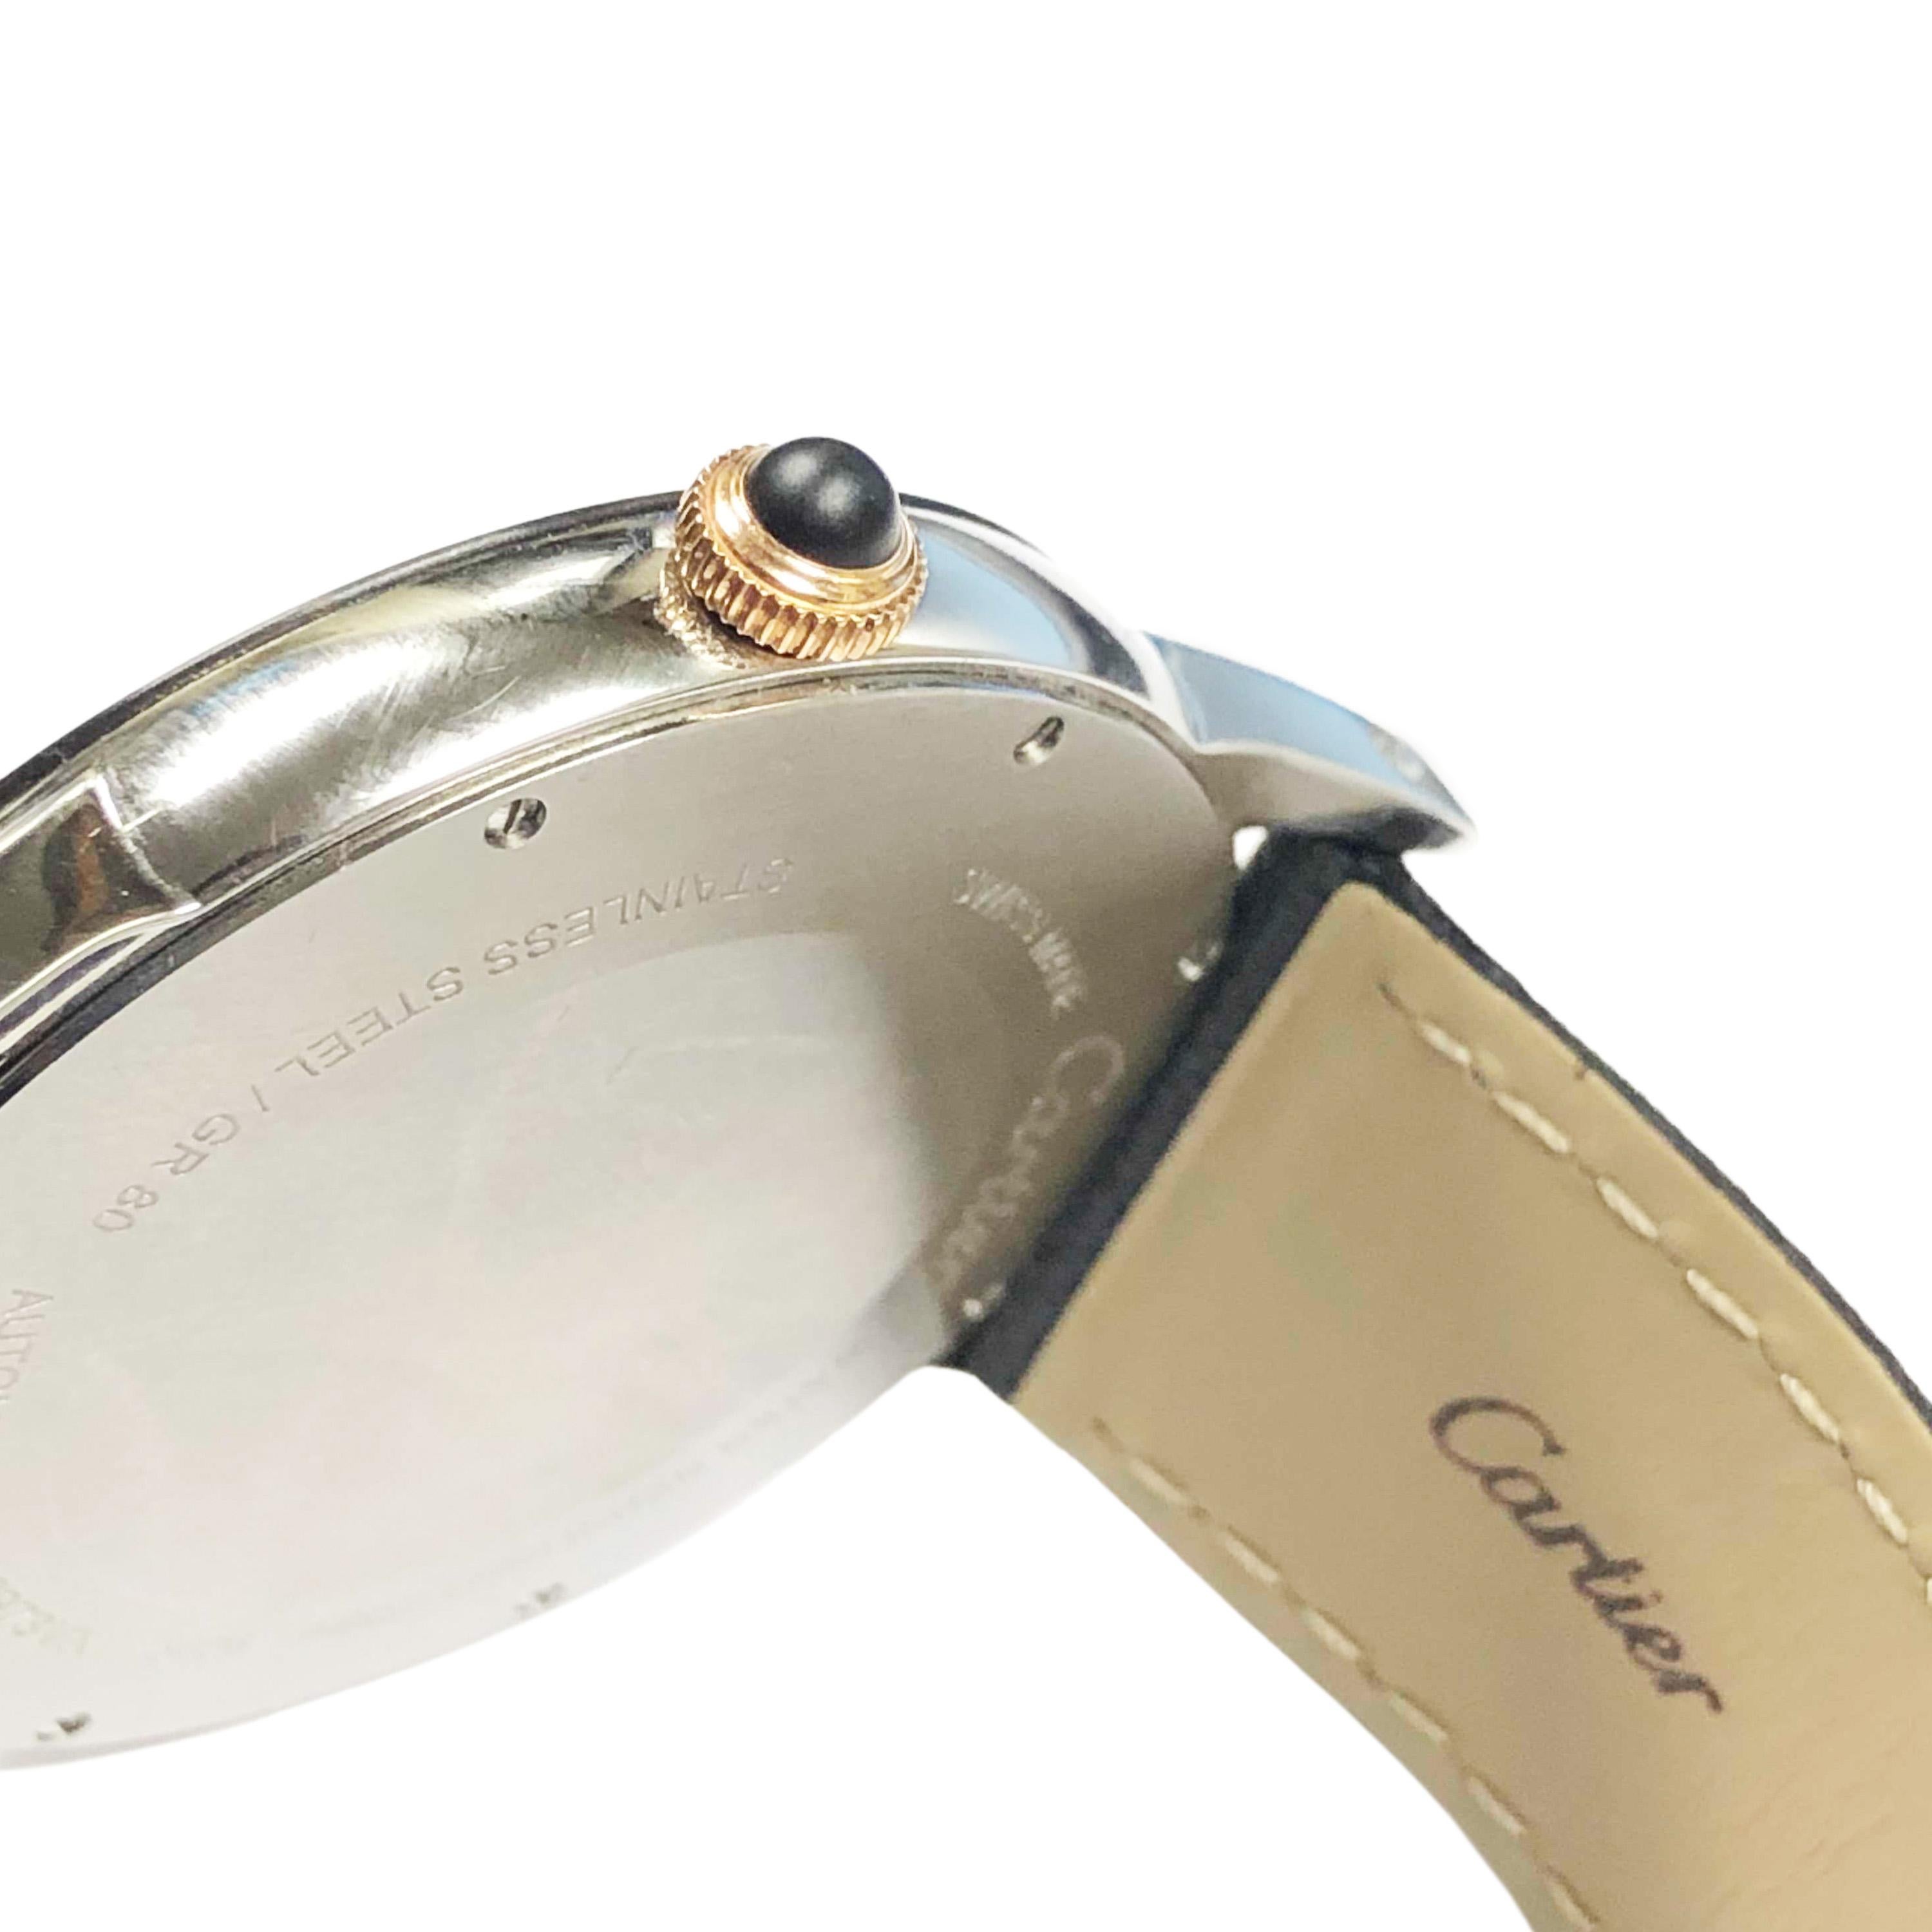 Circa 2016 Cartier Ronde Croisiere de Cartier (W2RN0005)  42mm stainless steel case with an 18k Rose gold and black bezel surrounding a Grey engine turned dial with Calendar window at the 3 position and raised Rose Gold Markers. Automatic, Self